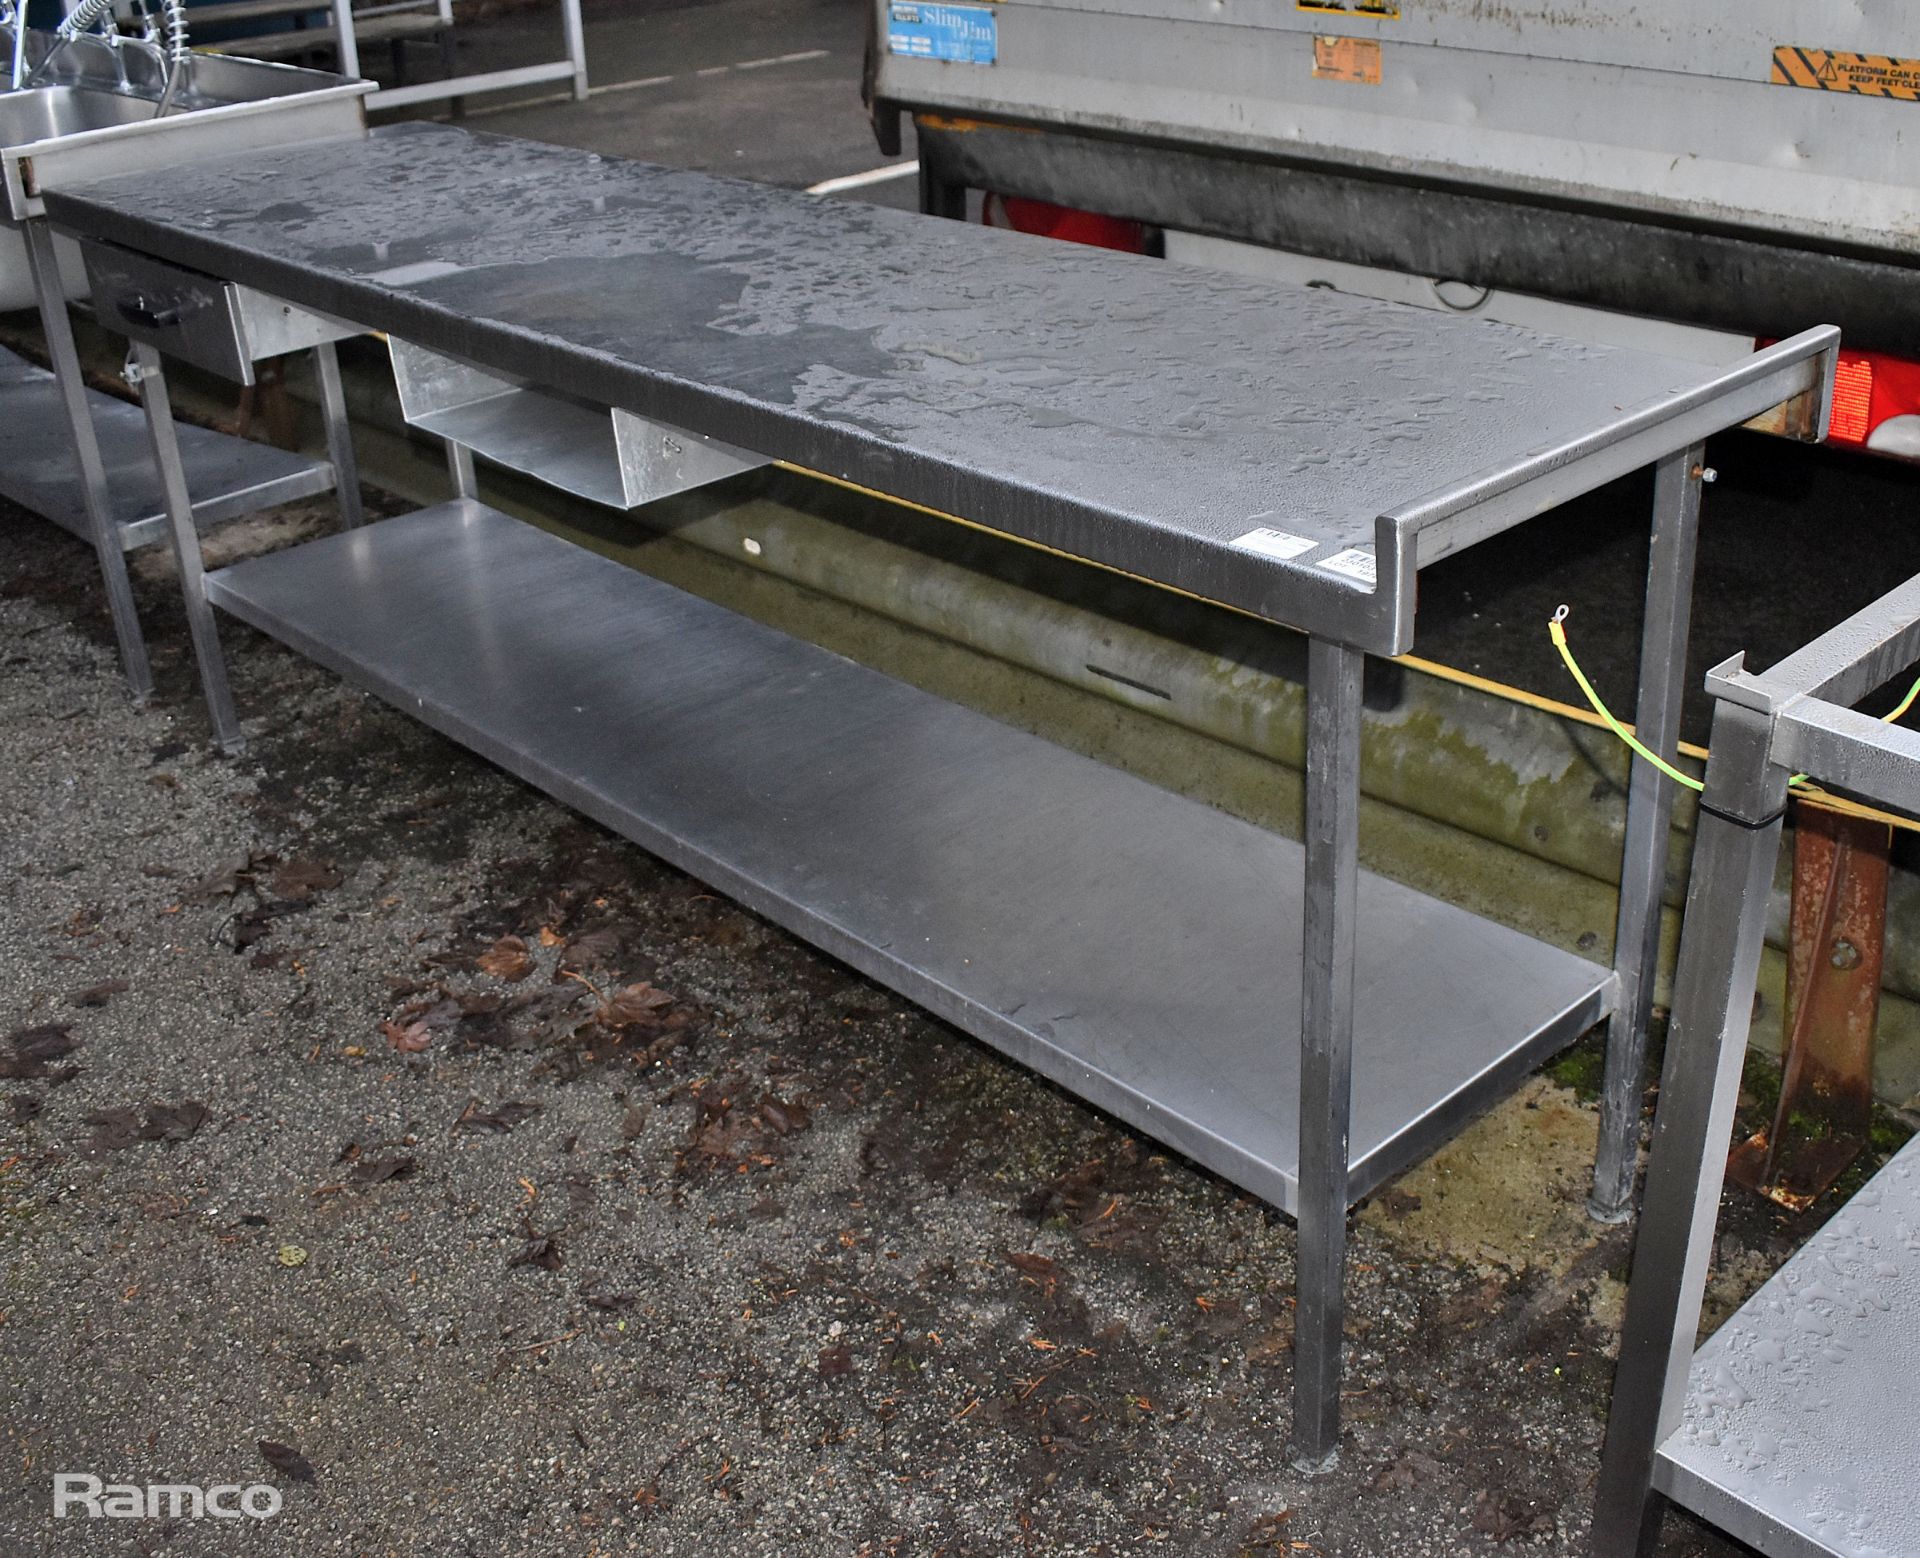 Stainless steel worktop table with drawers - 220x60x90cm - Image 3 of 5